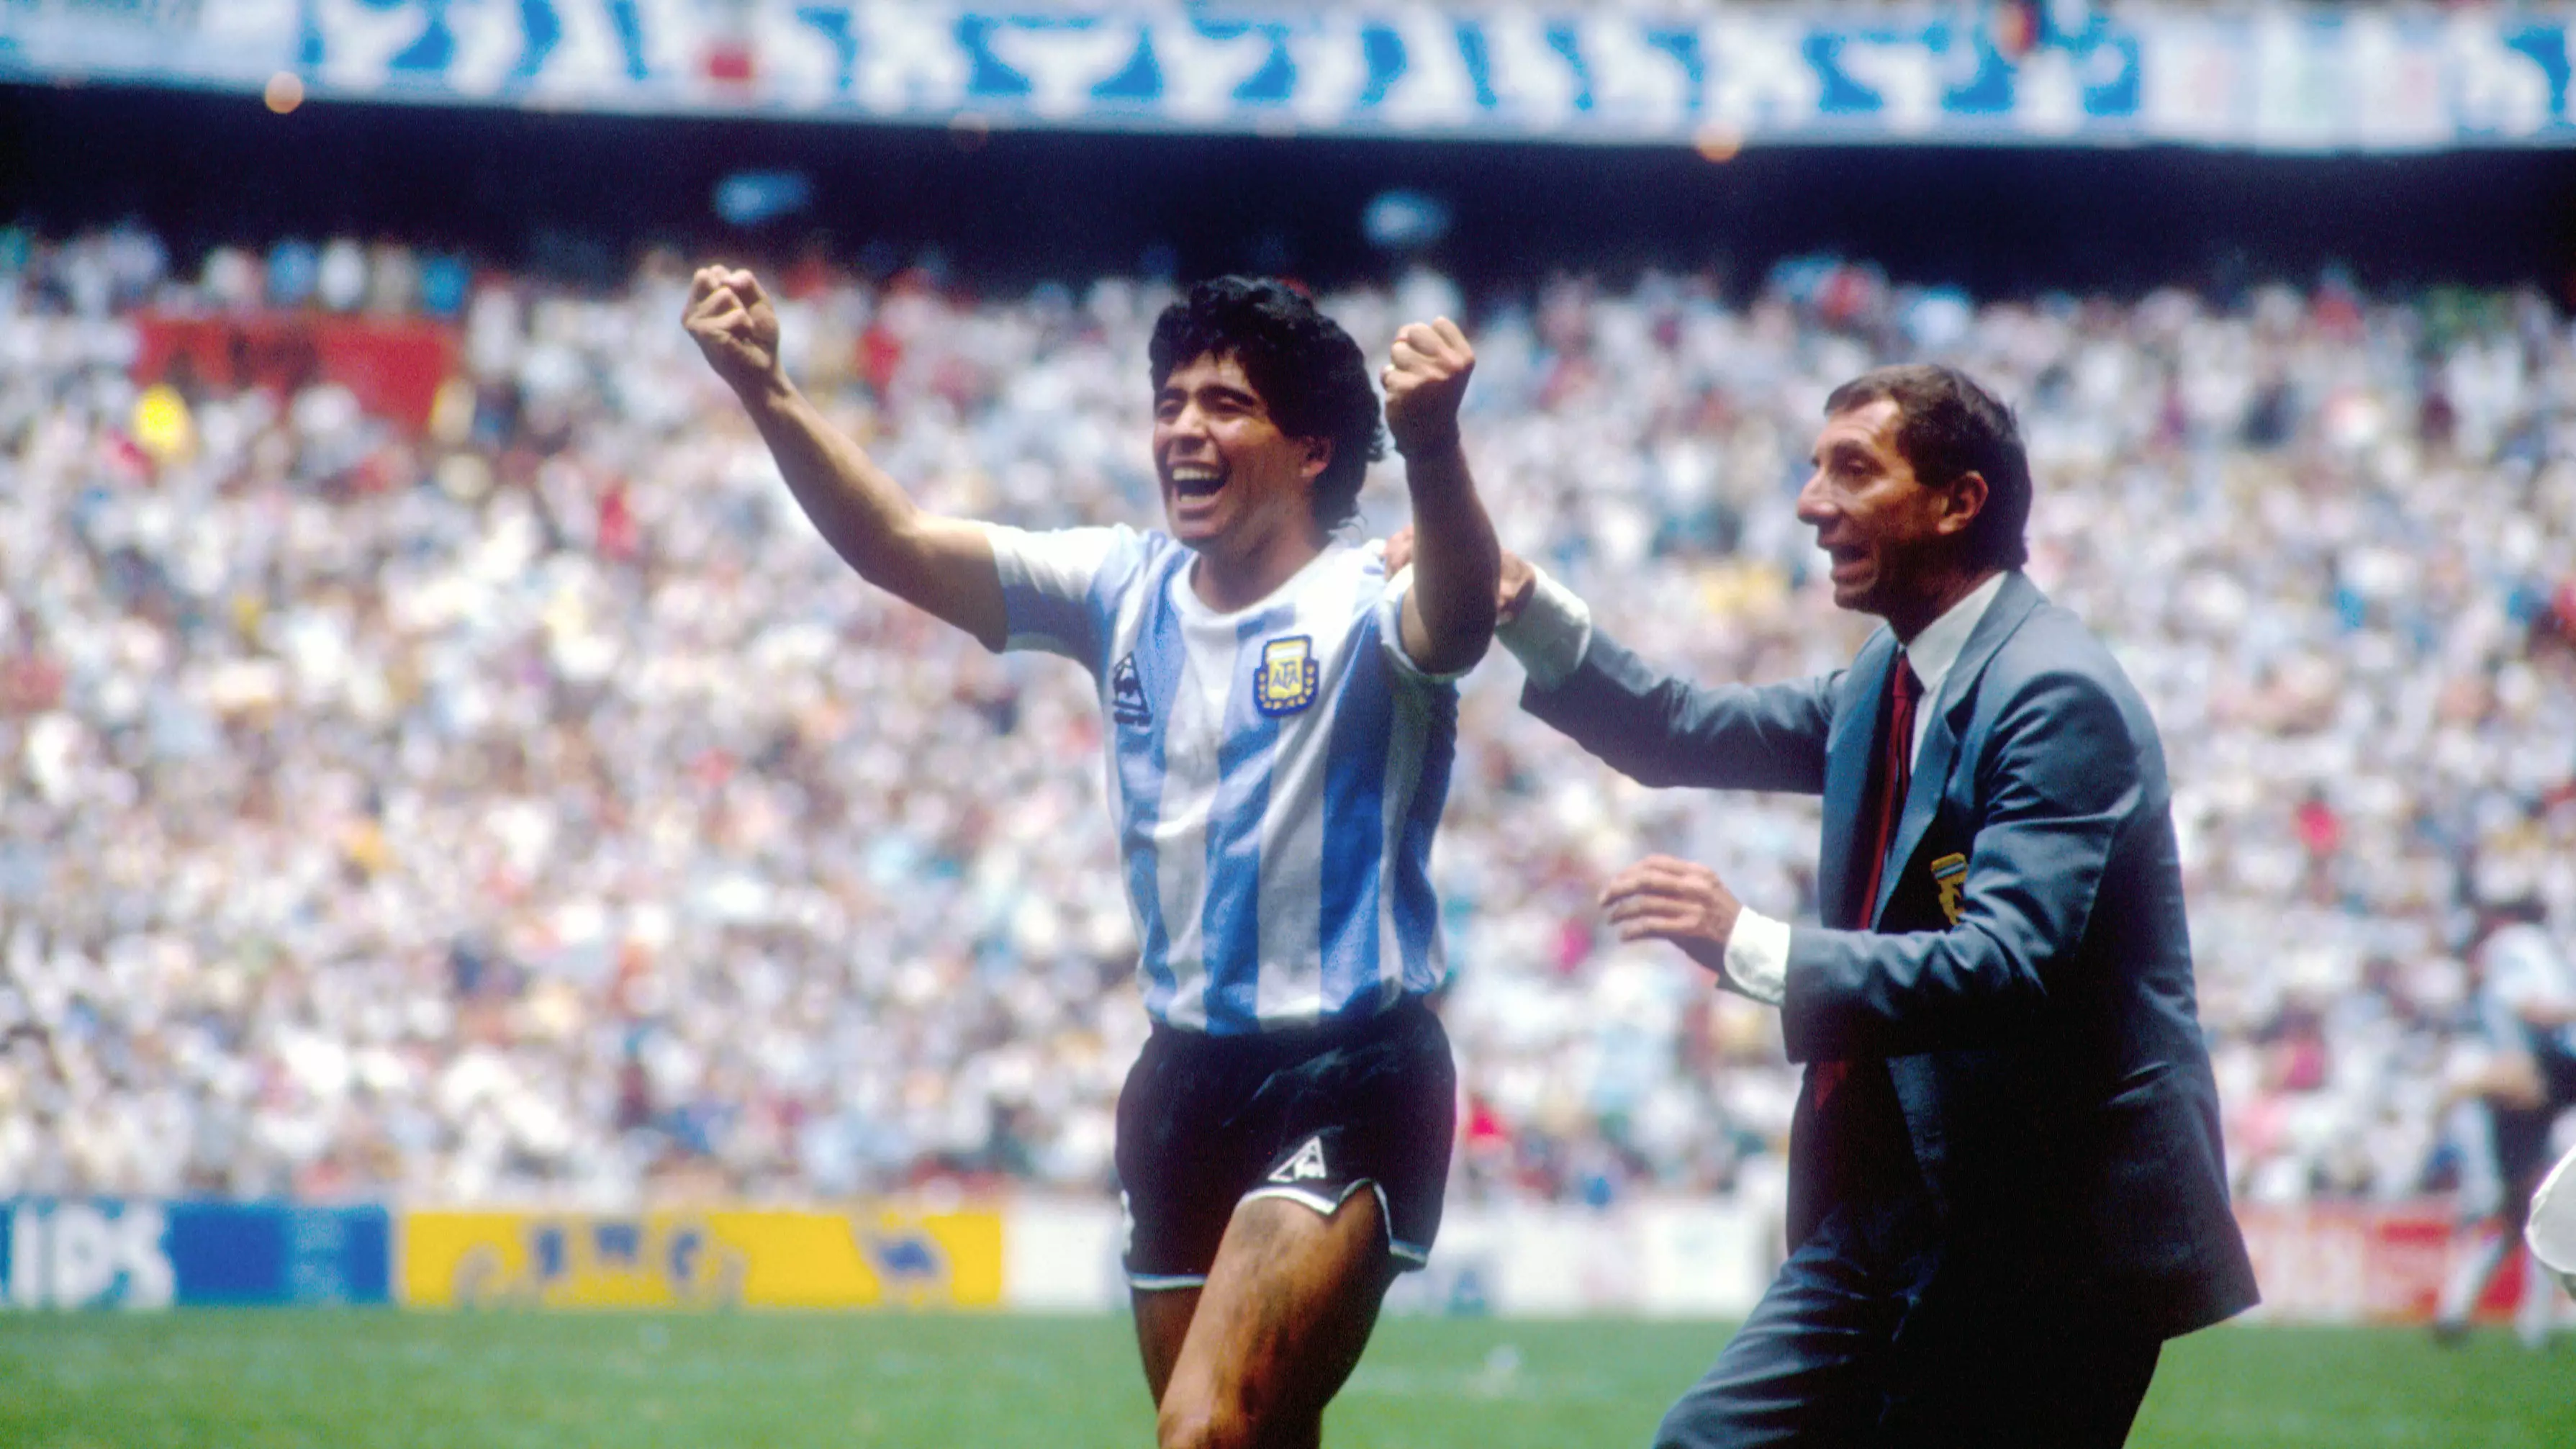 Teenager Claiming To Be Maradona's Son Demands His Body Be Exhumed